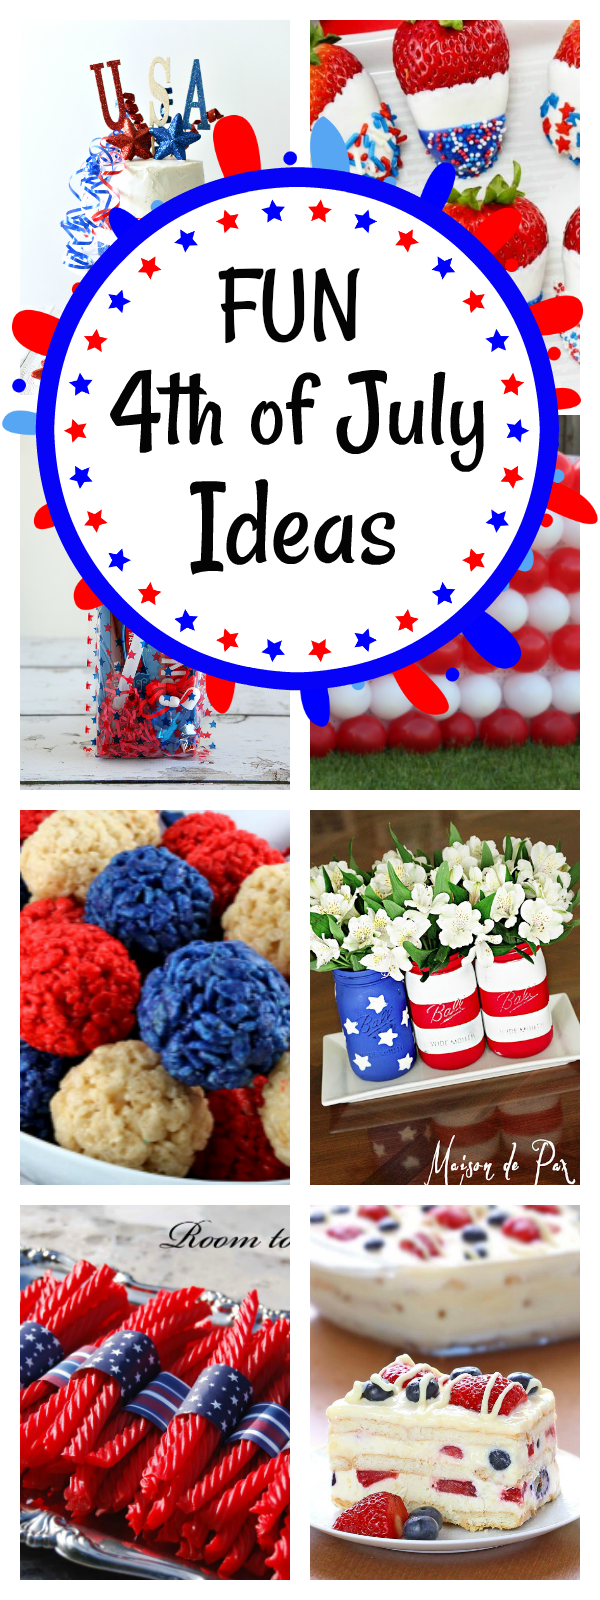 Fun 4th of July Party Ideas. Whether you're looking for food or favors, decor or games, these 4th of July party ideas will have you throwing the best bash in town! #4thofJuly #patriotic #independenceday